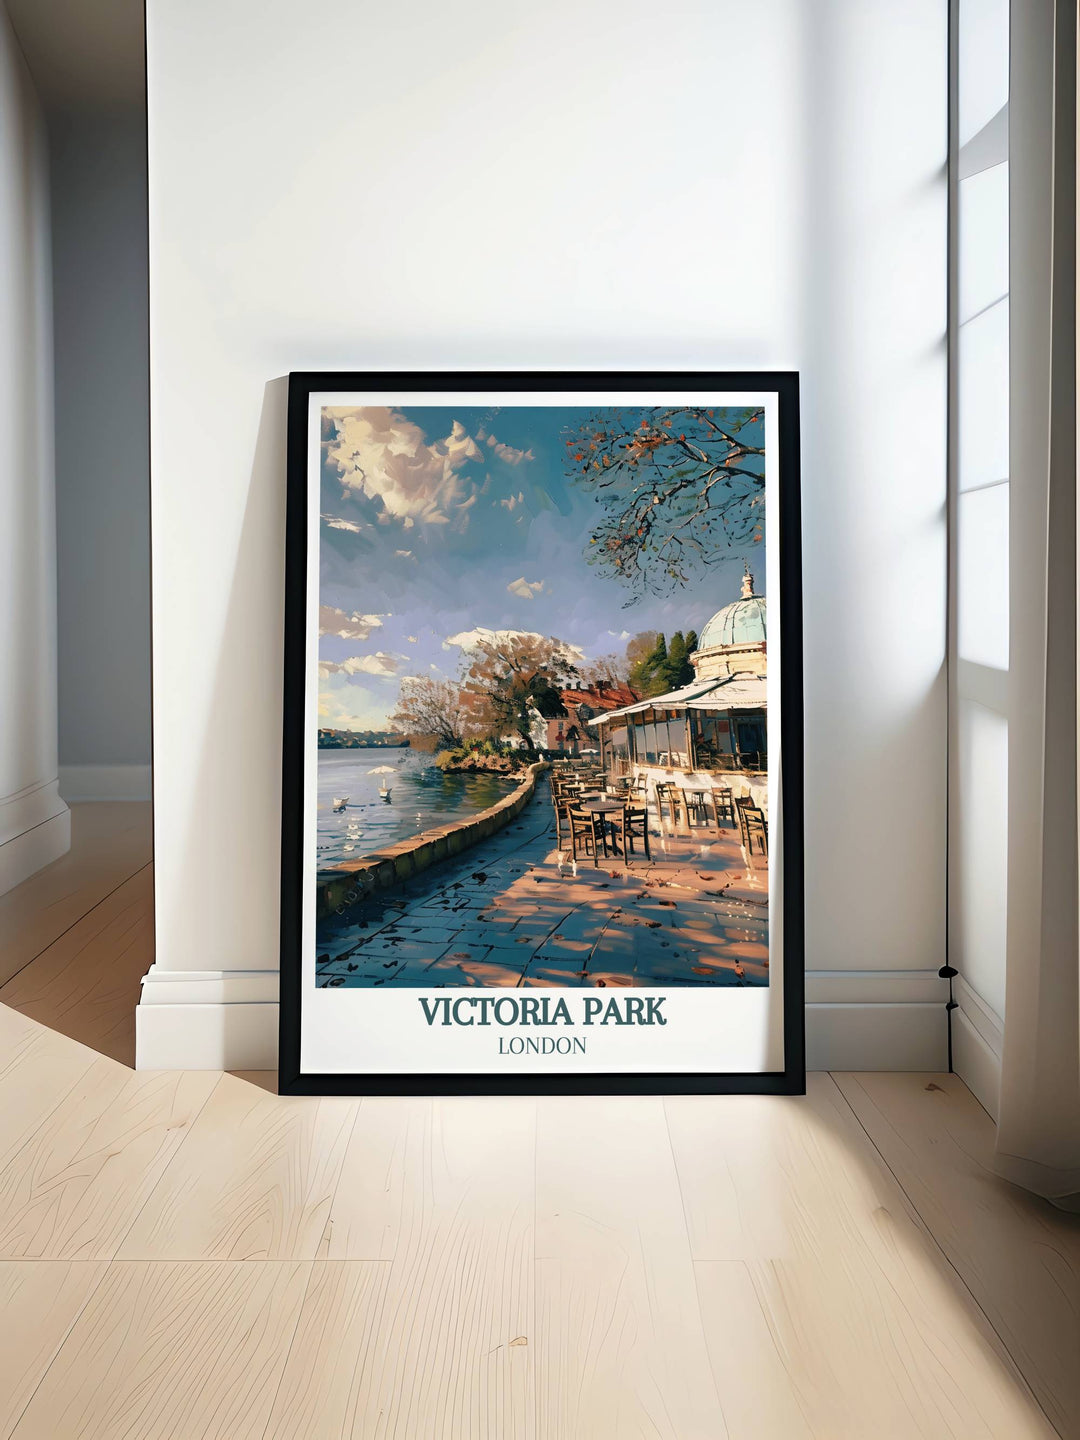 Victoria Park wall art showcasing the picturesque charm of The Pavilion Café in East London ideal for adding elegance and serenity to any room decor.